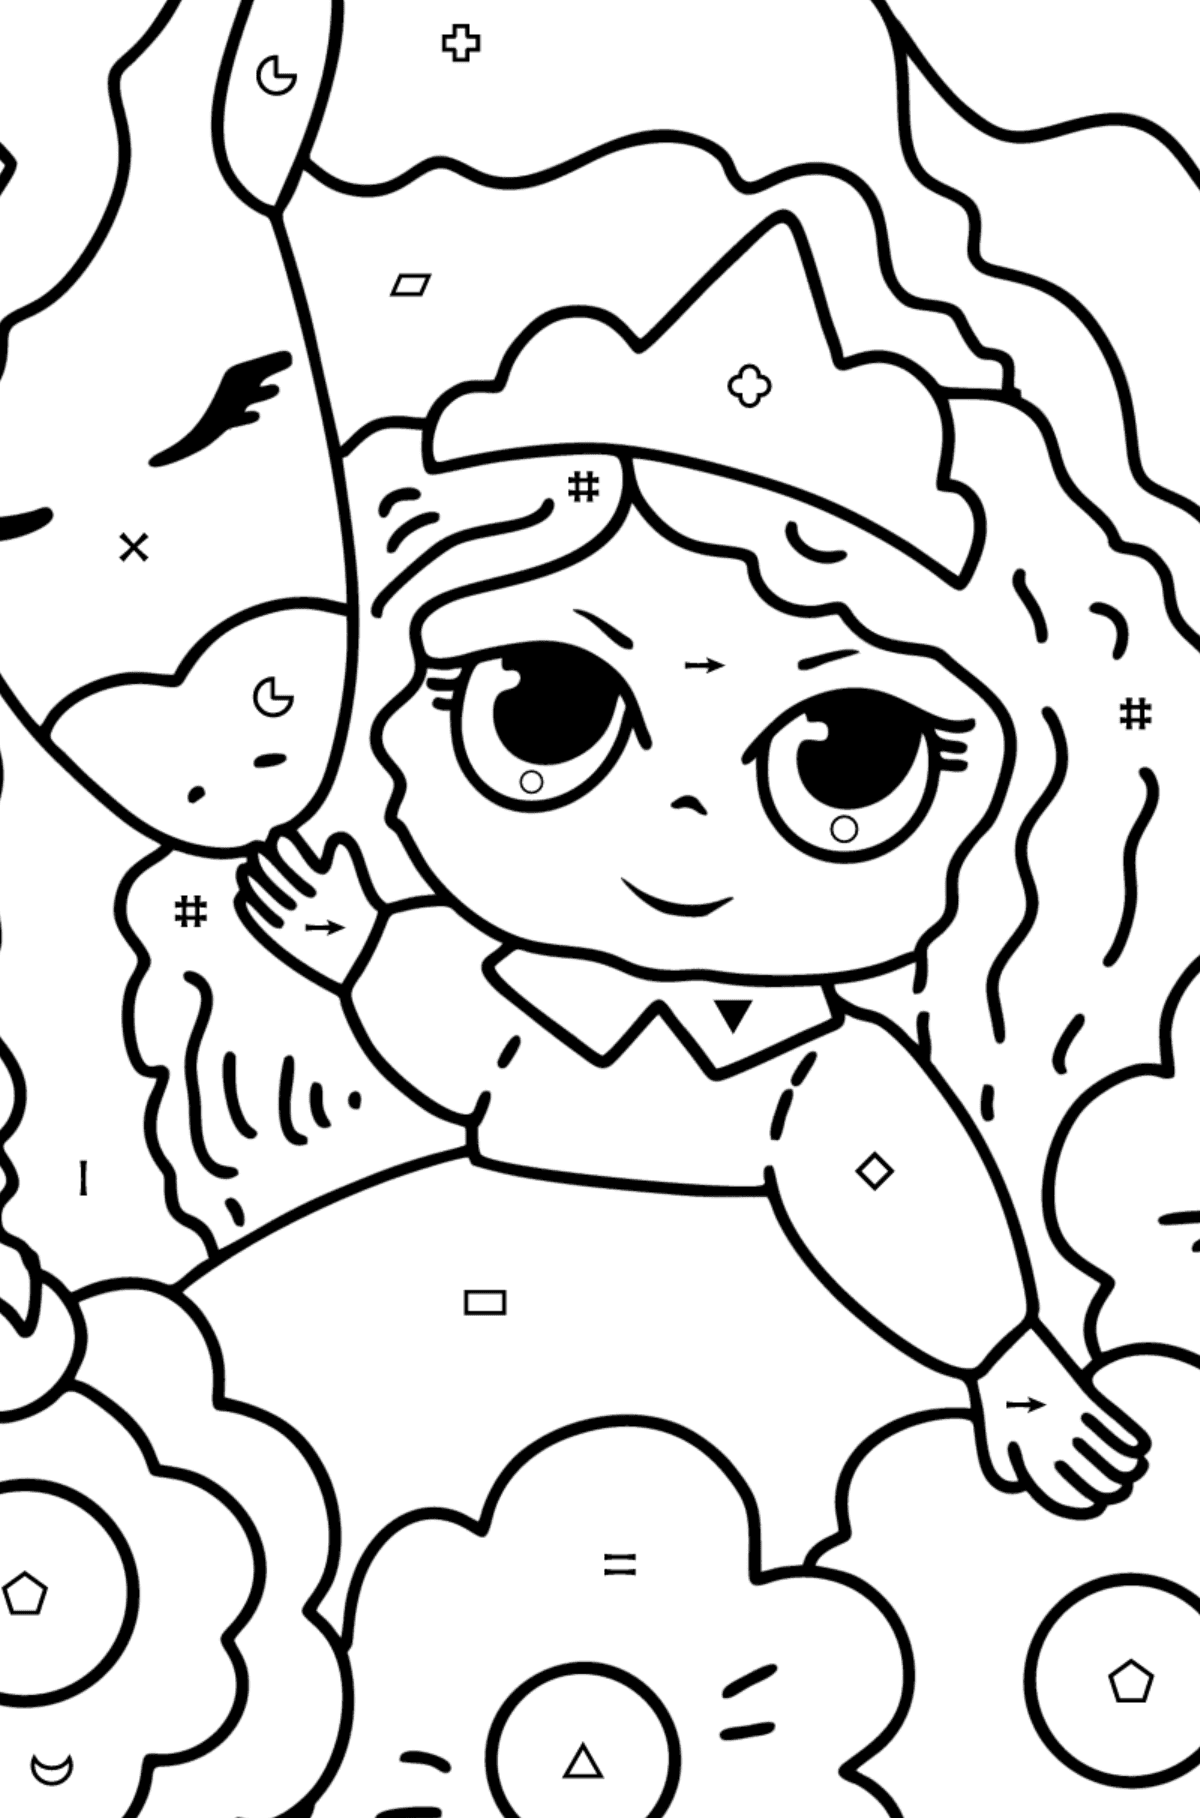 Magical unicorn and princess coloring page - Coloring by Symbols and Geometric Shapes for Kids